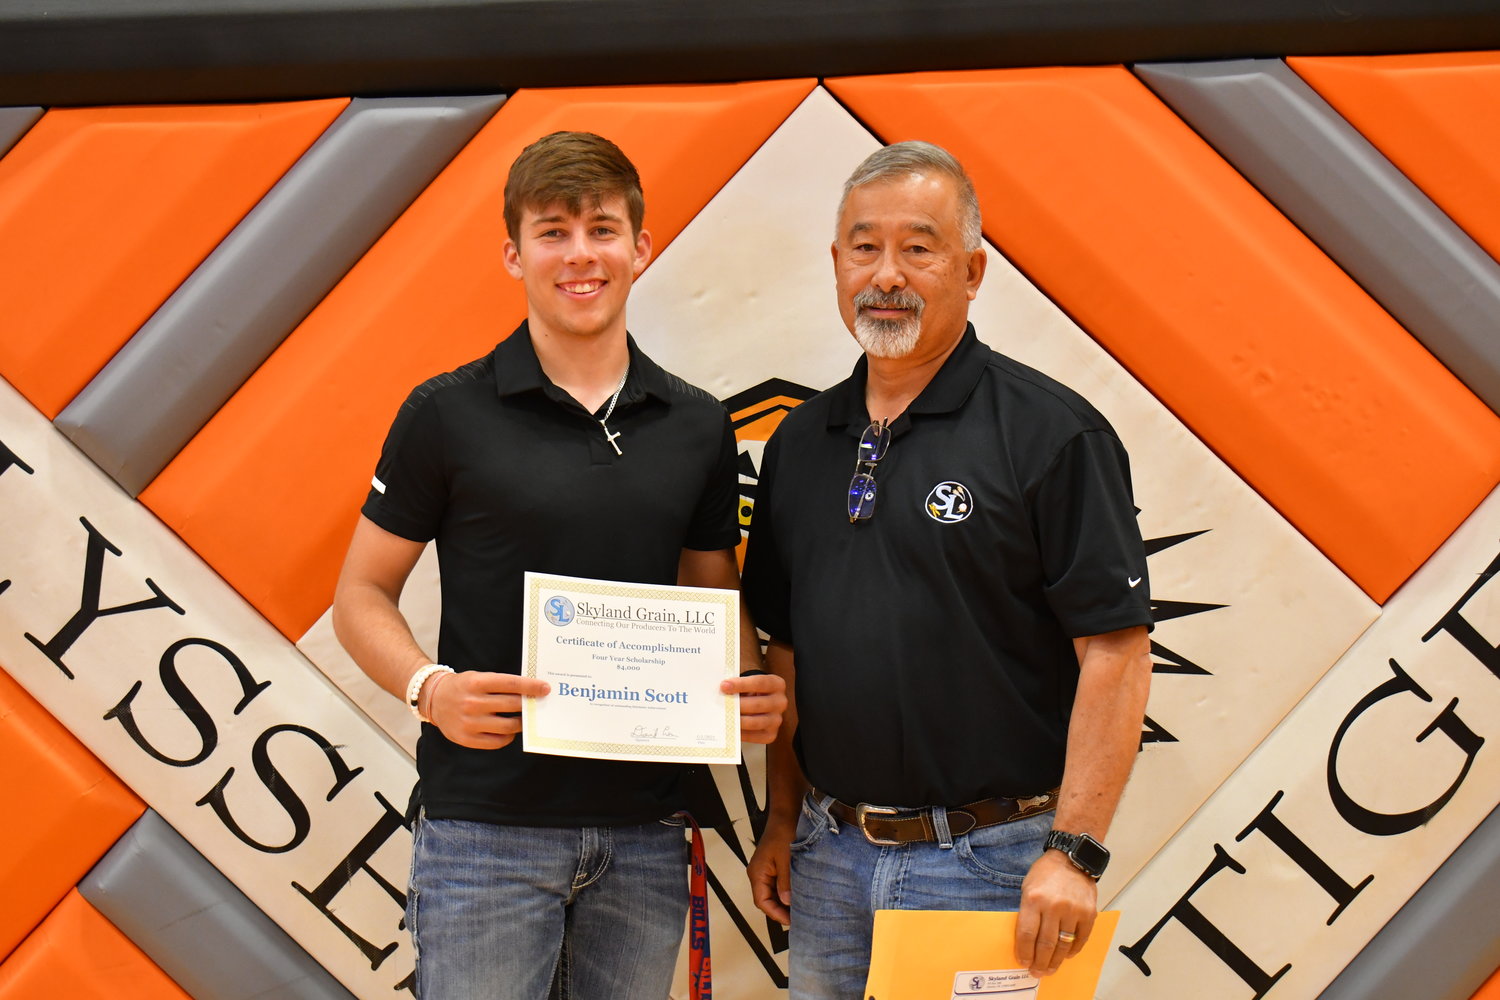 Senior Awards — Ben Scott was given the Skyland Grain College Scholarship by Tim Giesick on Friday, May 13, 2022.